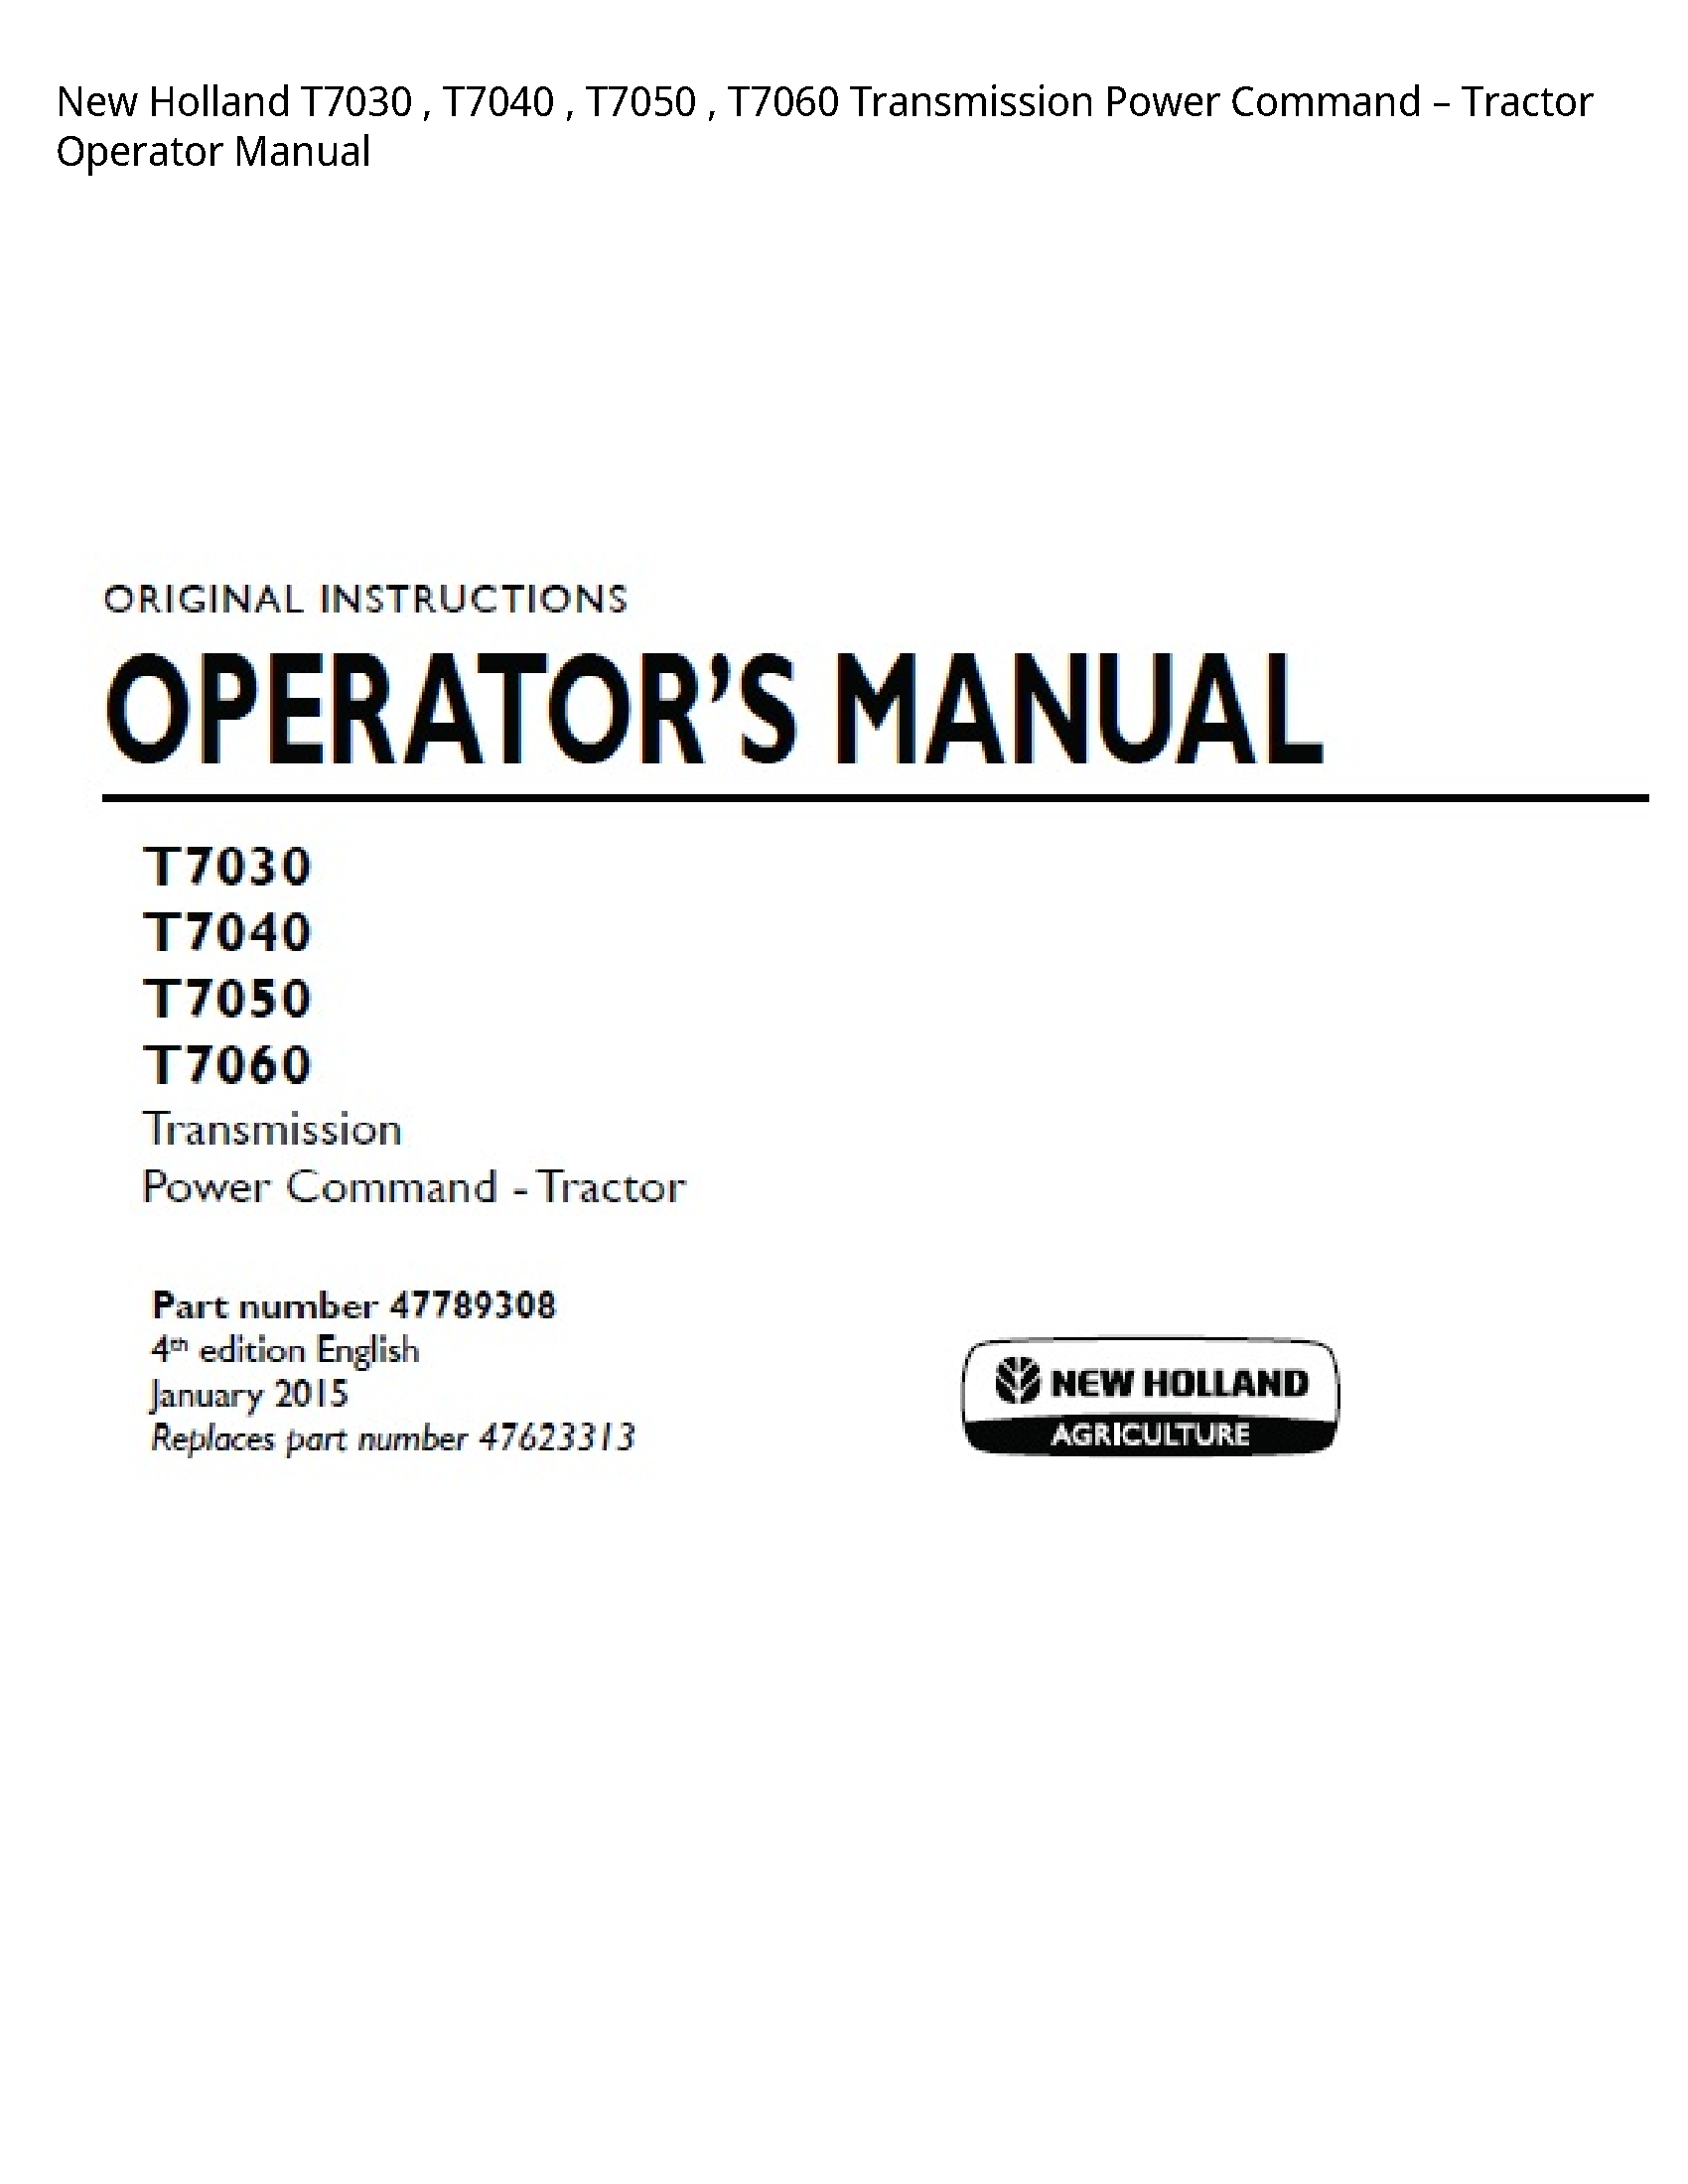 New Holland T7030 Transmission Power Command Tractor Operator manual